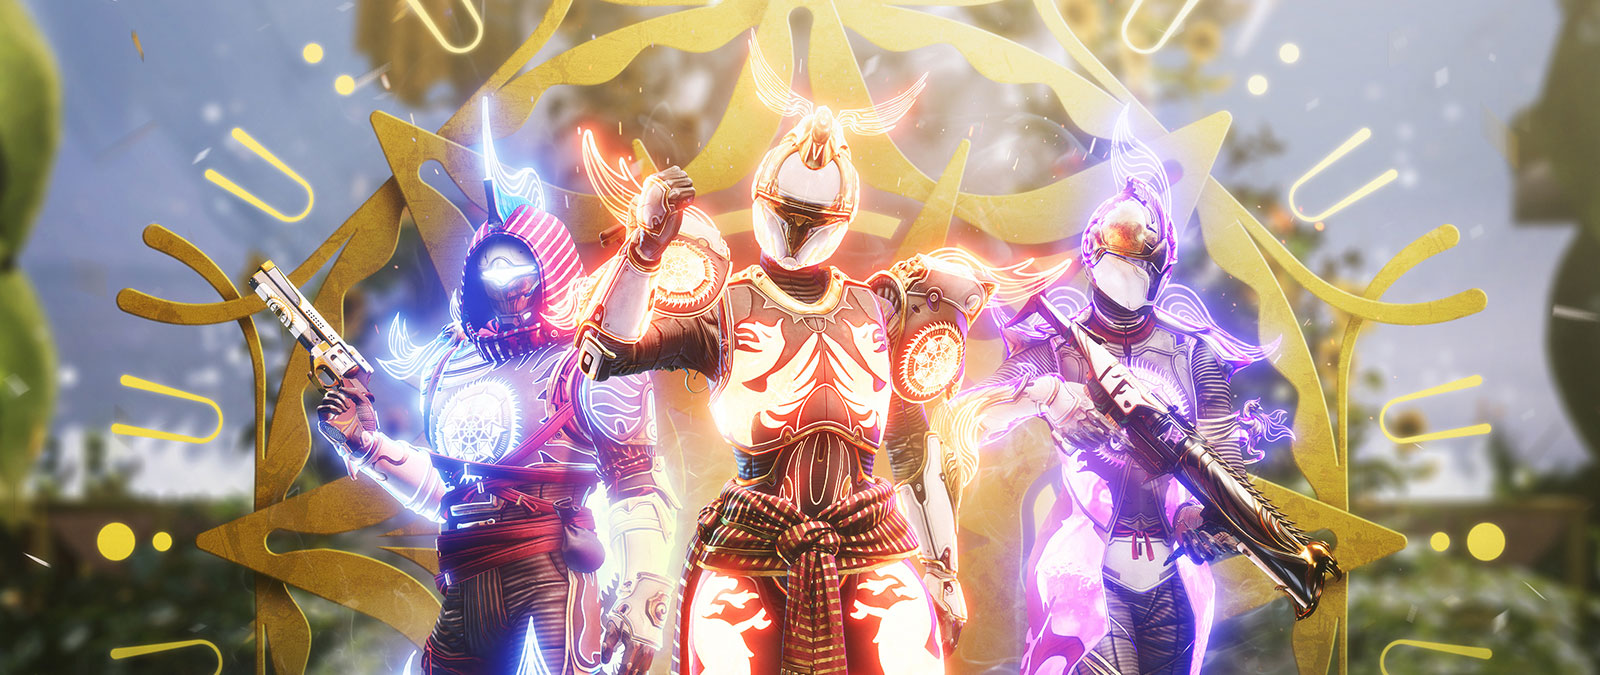 Three characters posing with featured glowing armor